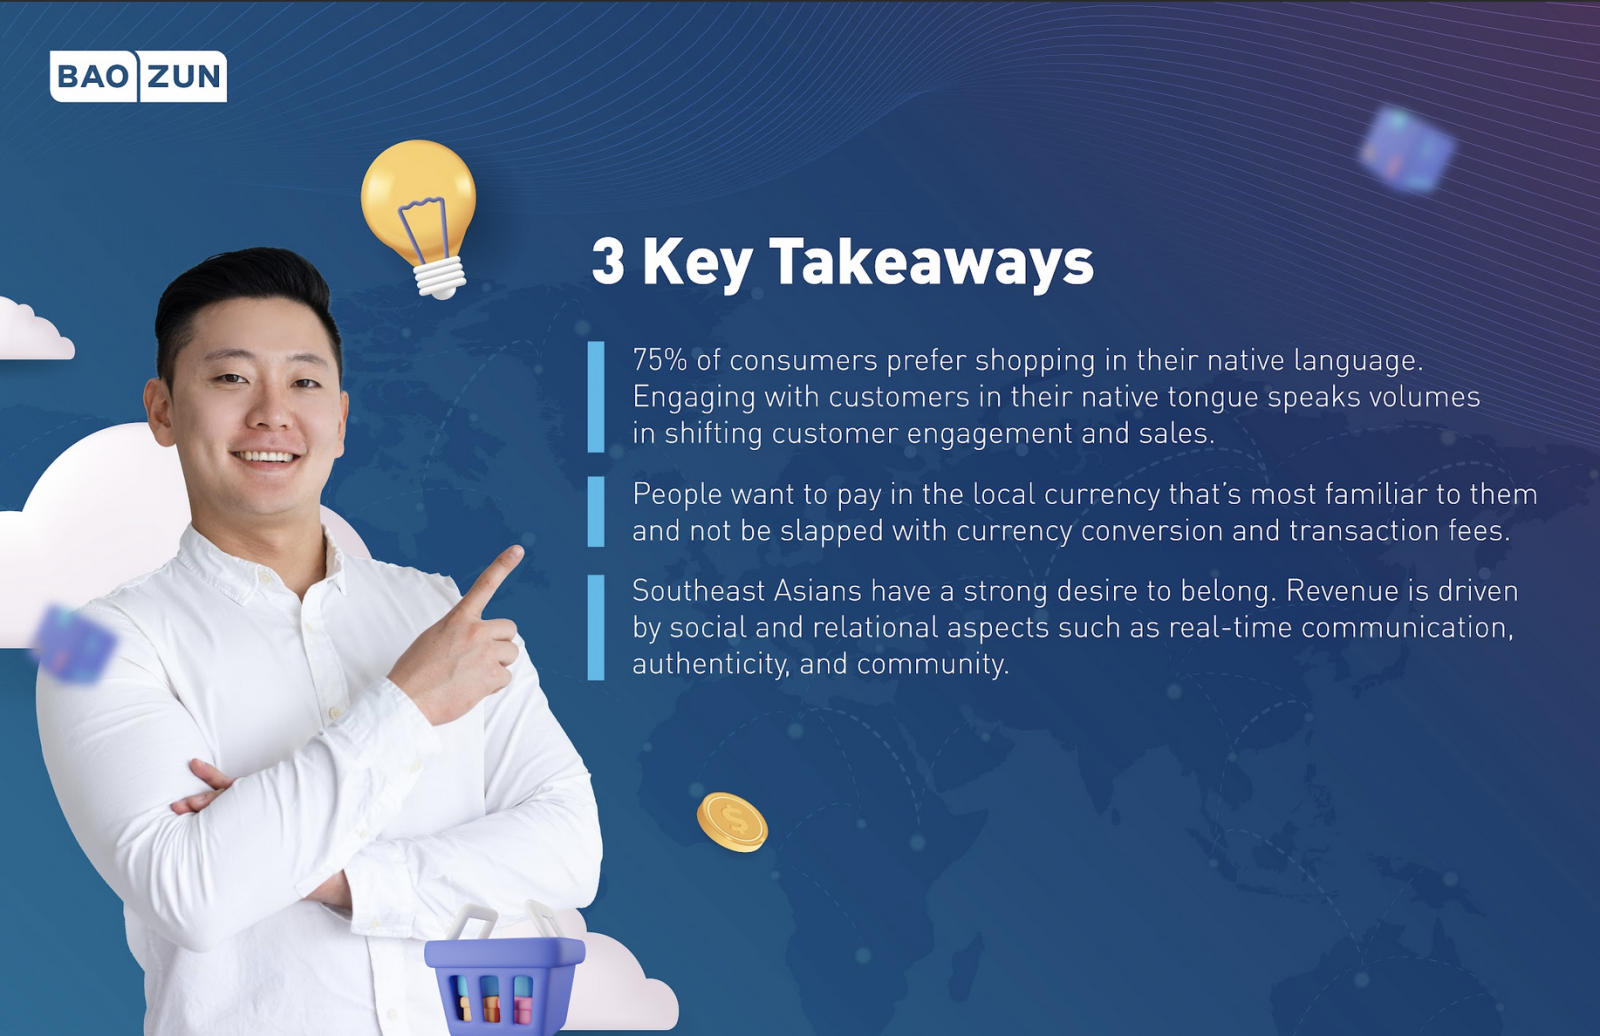 3 Key Takeaways 75% of consumers prefer shopping in their native language. Engaging with customers in their native tongue speaks volumes in shifting customer engagement and sales. People want to pay in the local currency that’s most familiar to them and not be slapped with currency conversion and transaction fees. Southeast Asians have a strong desire to belong. Revenue is driven by social and relational aspects such as real-time communication, authenticity, and community.